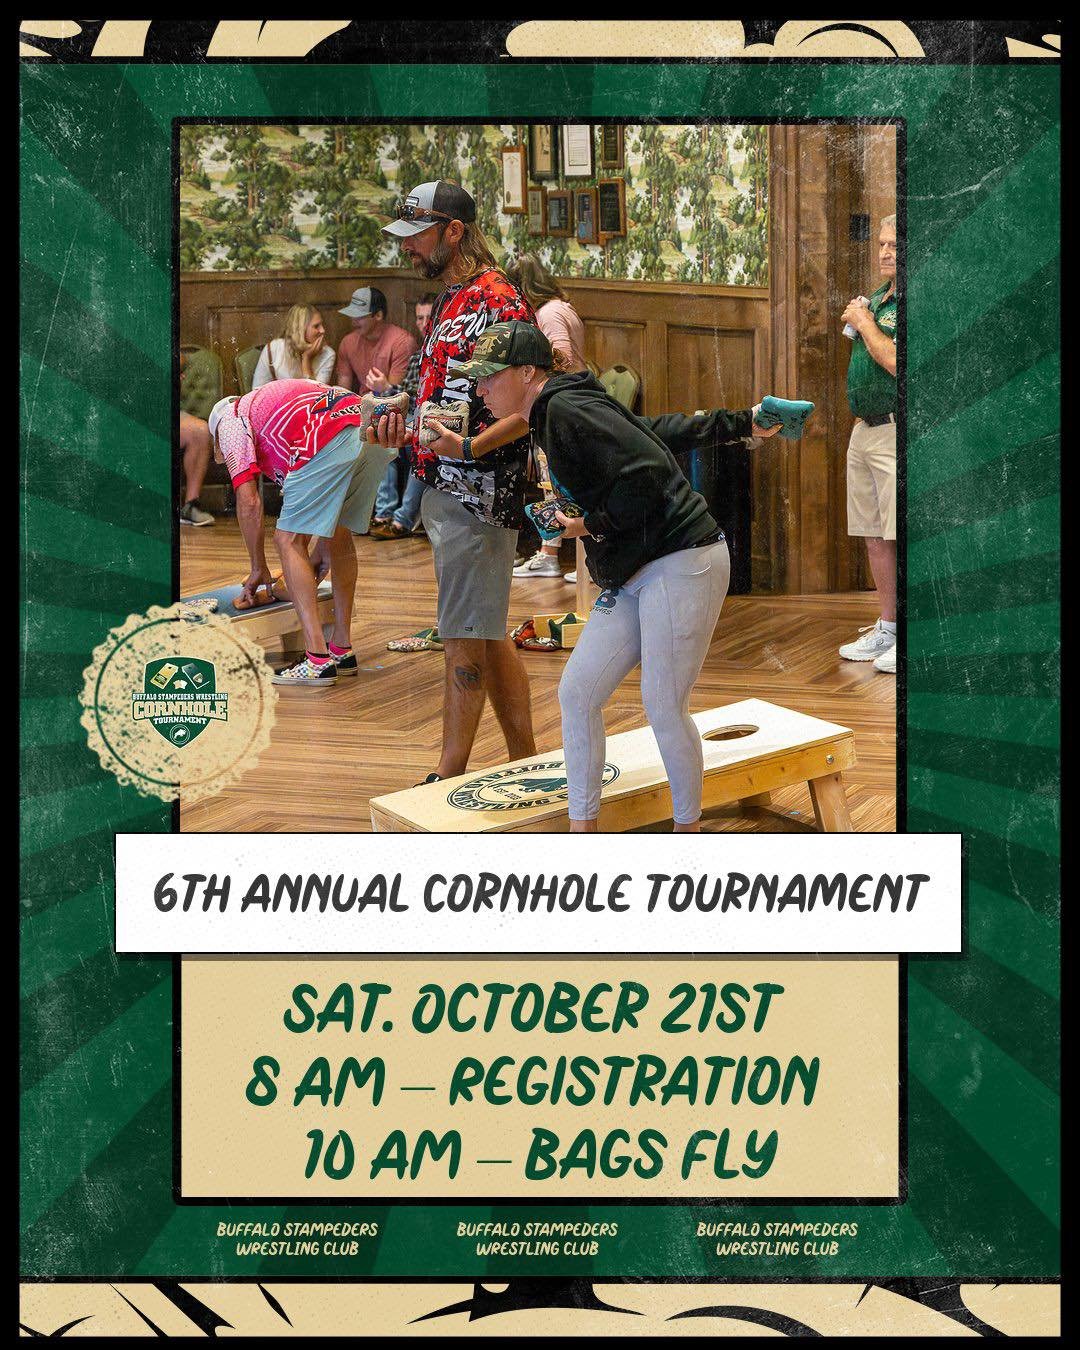 Announcing our 6th Annual Cornhole Tournament! Visit www.buffalostampeders.com/cornhole for more info!